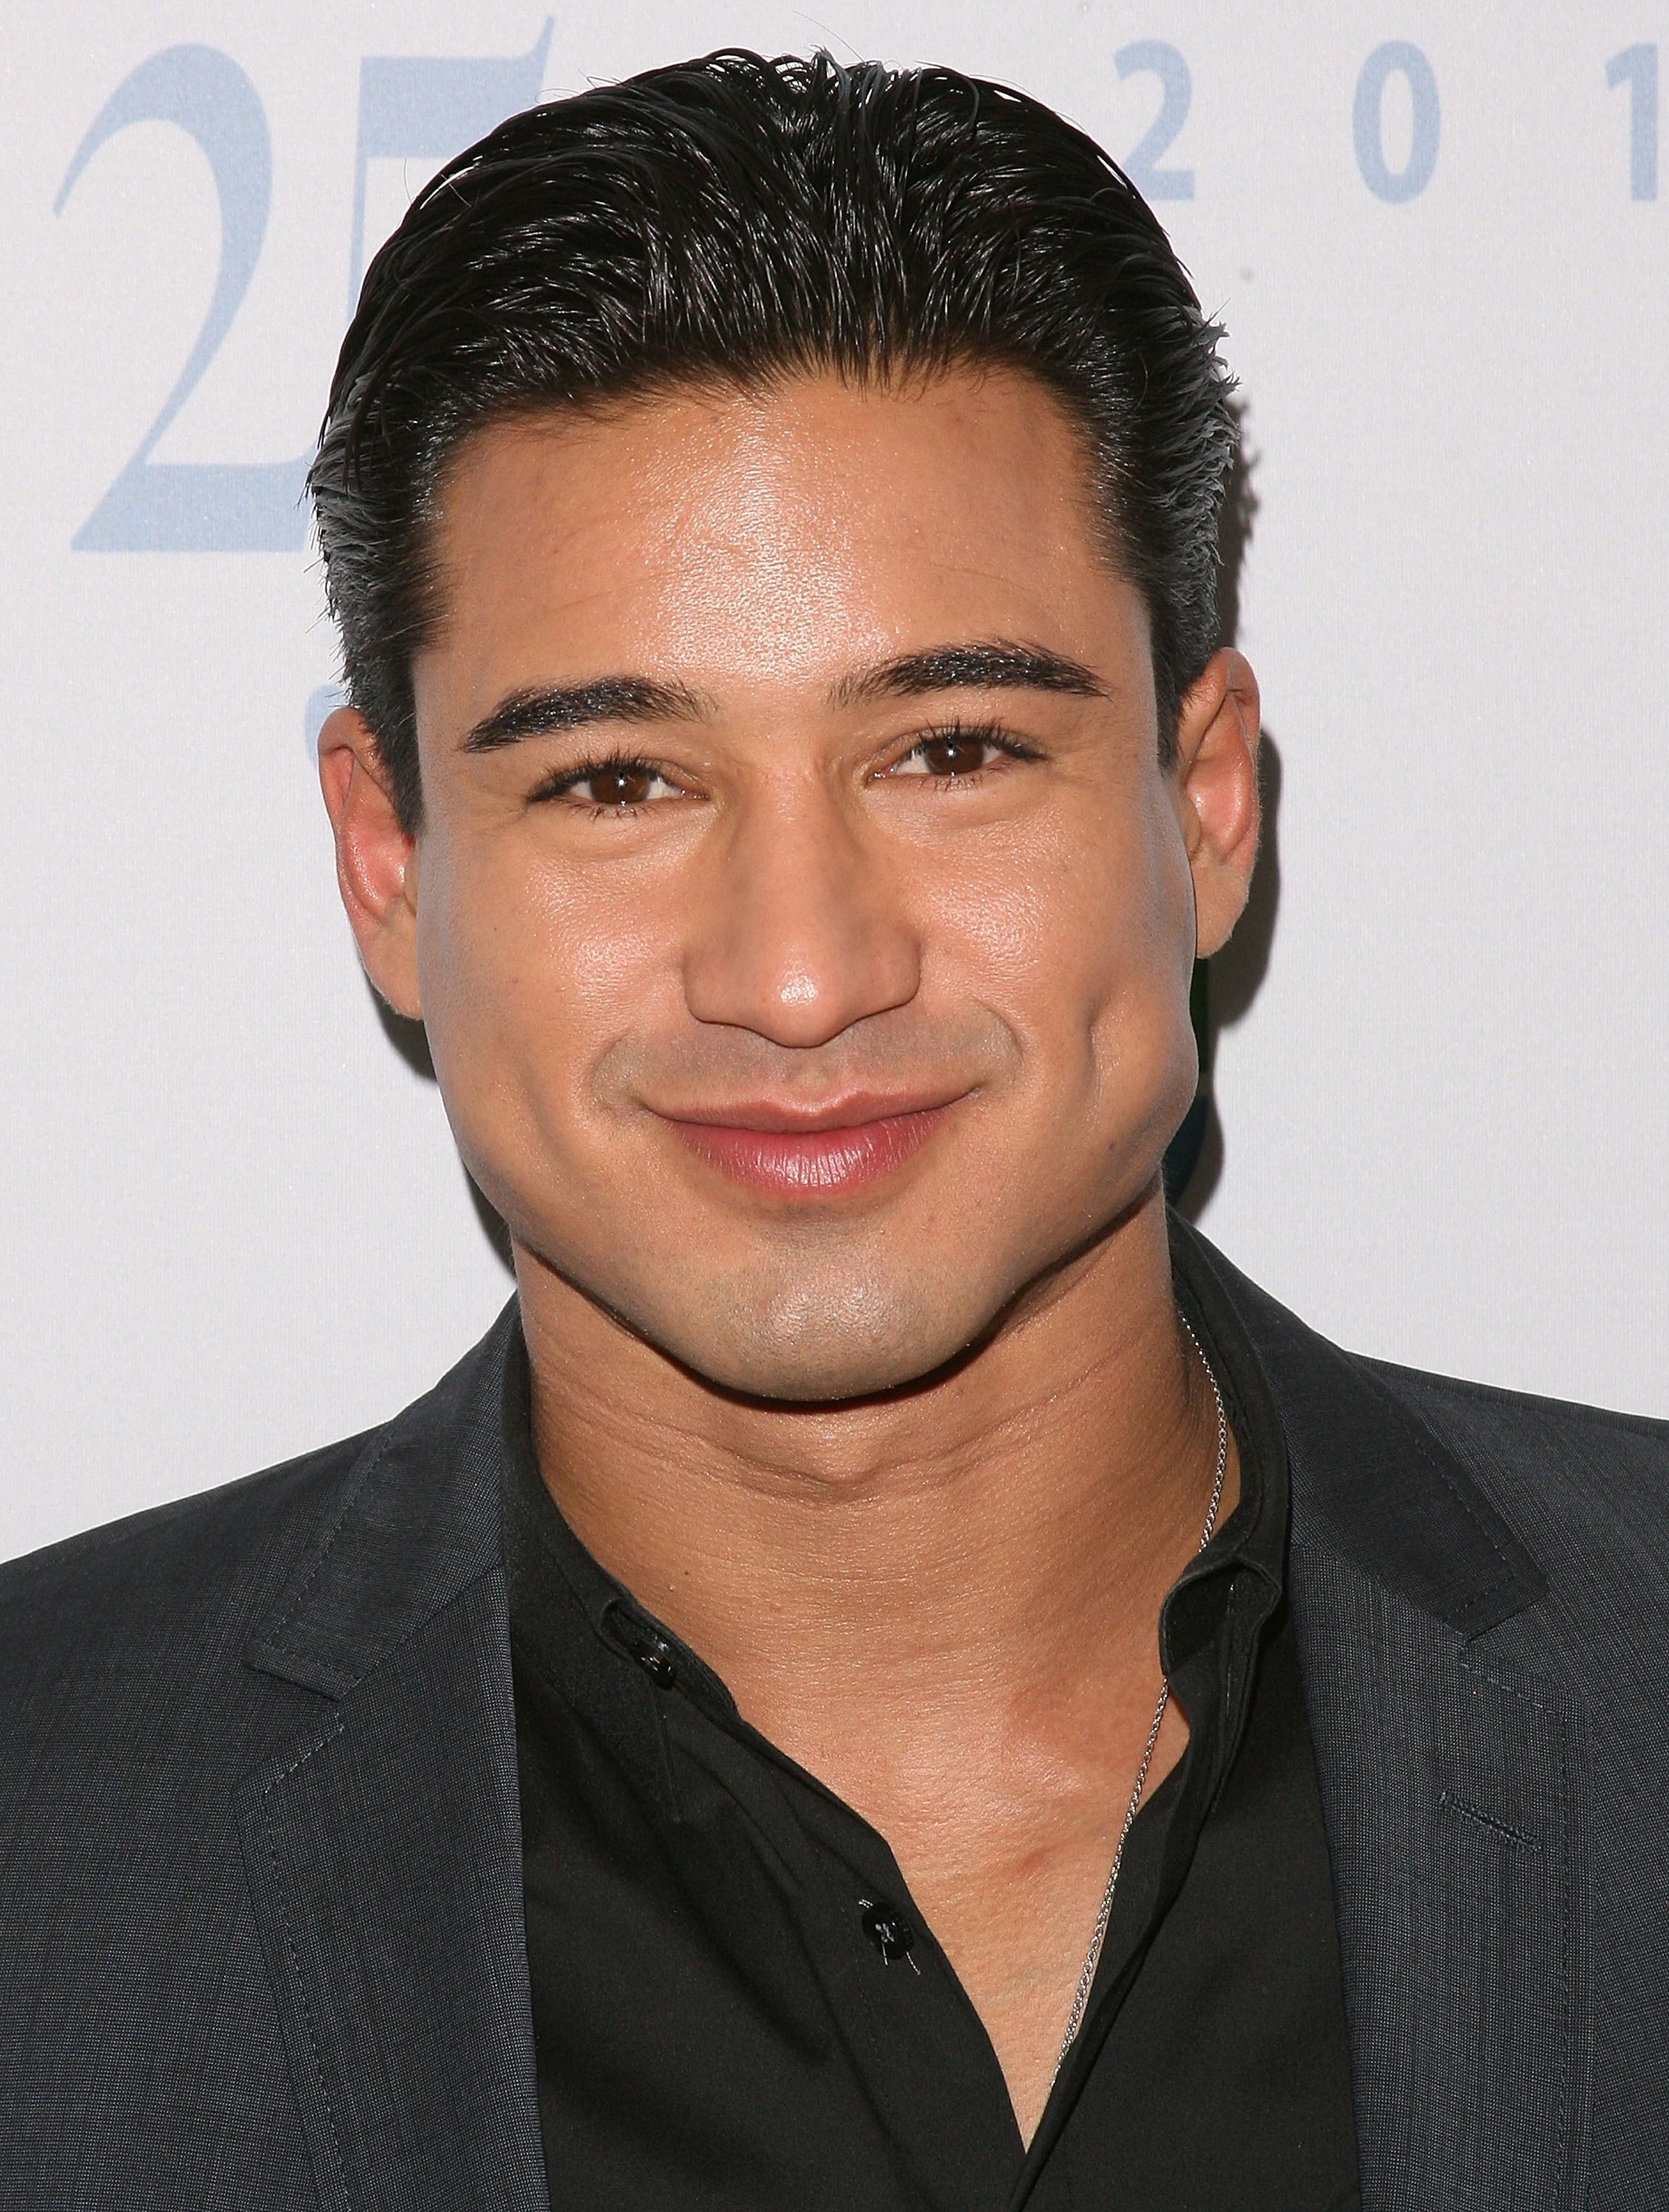 Mario Lopez Wallpapers High Quality | Download Free